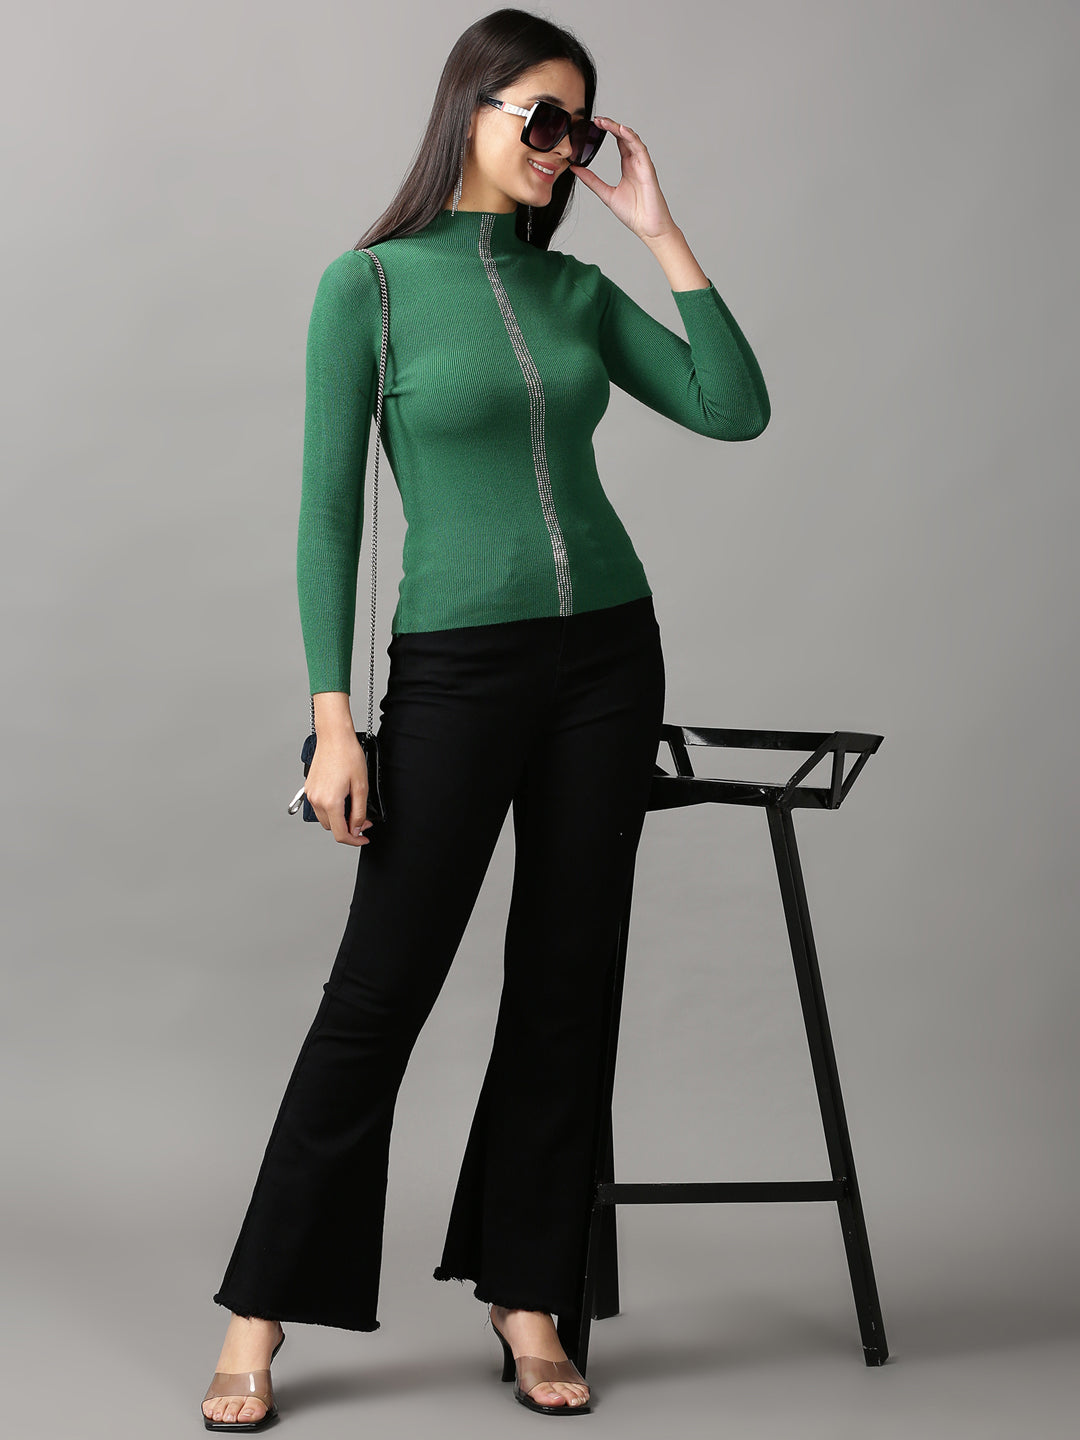 Women's Green Embellished Fitted Top